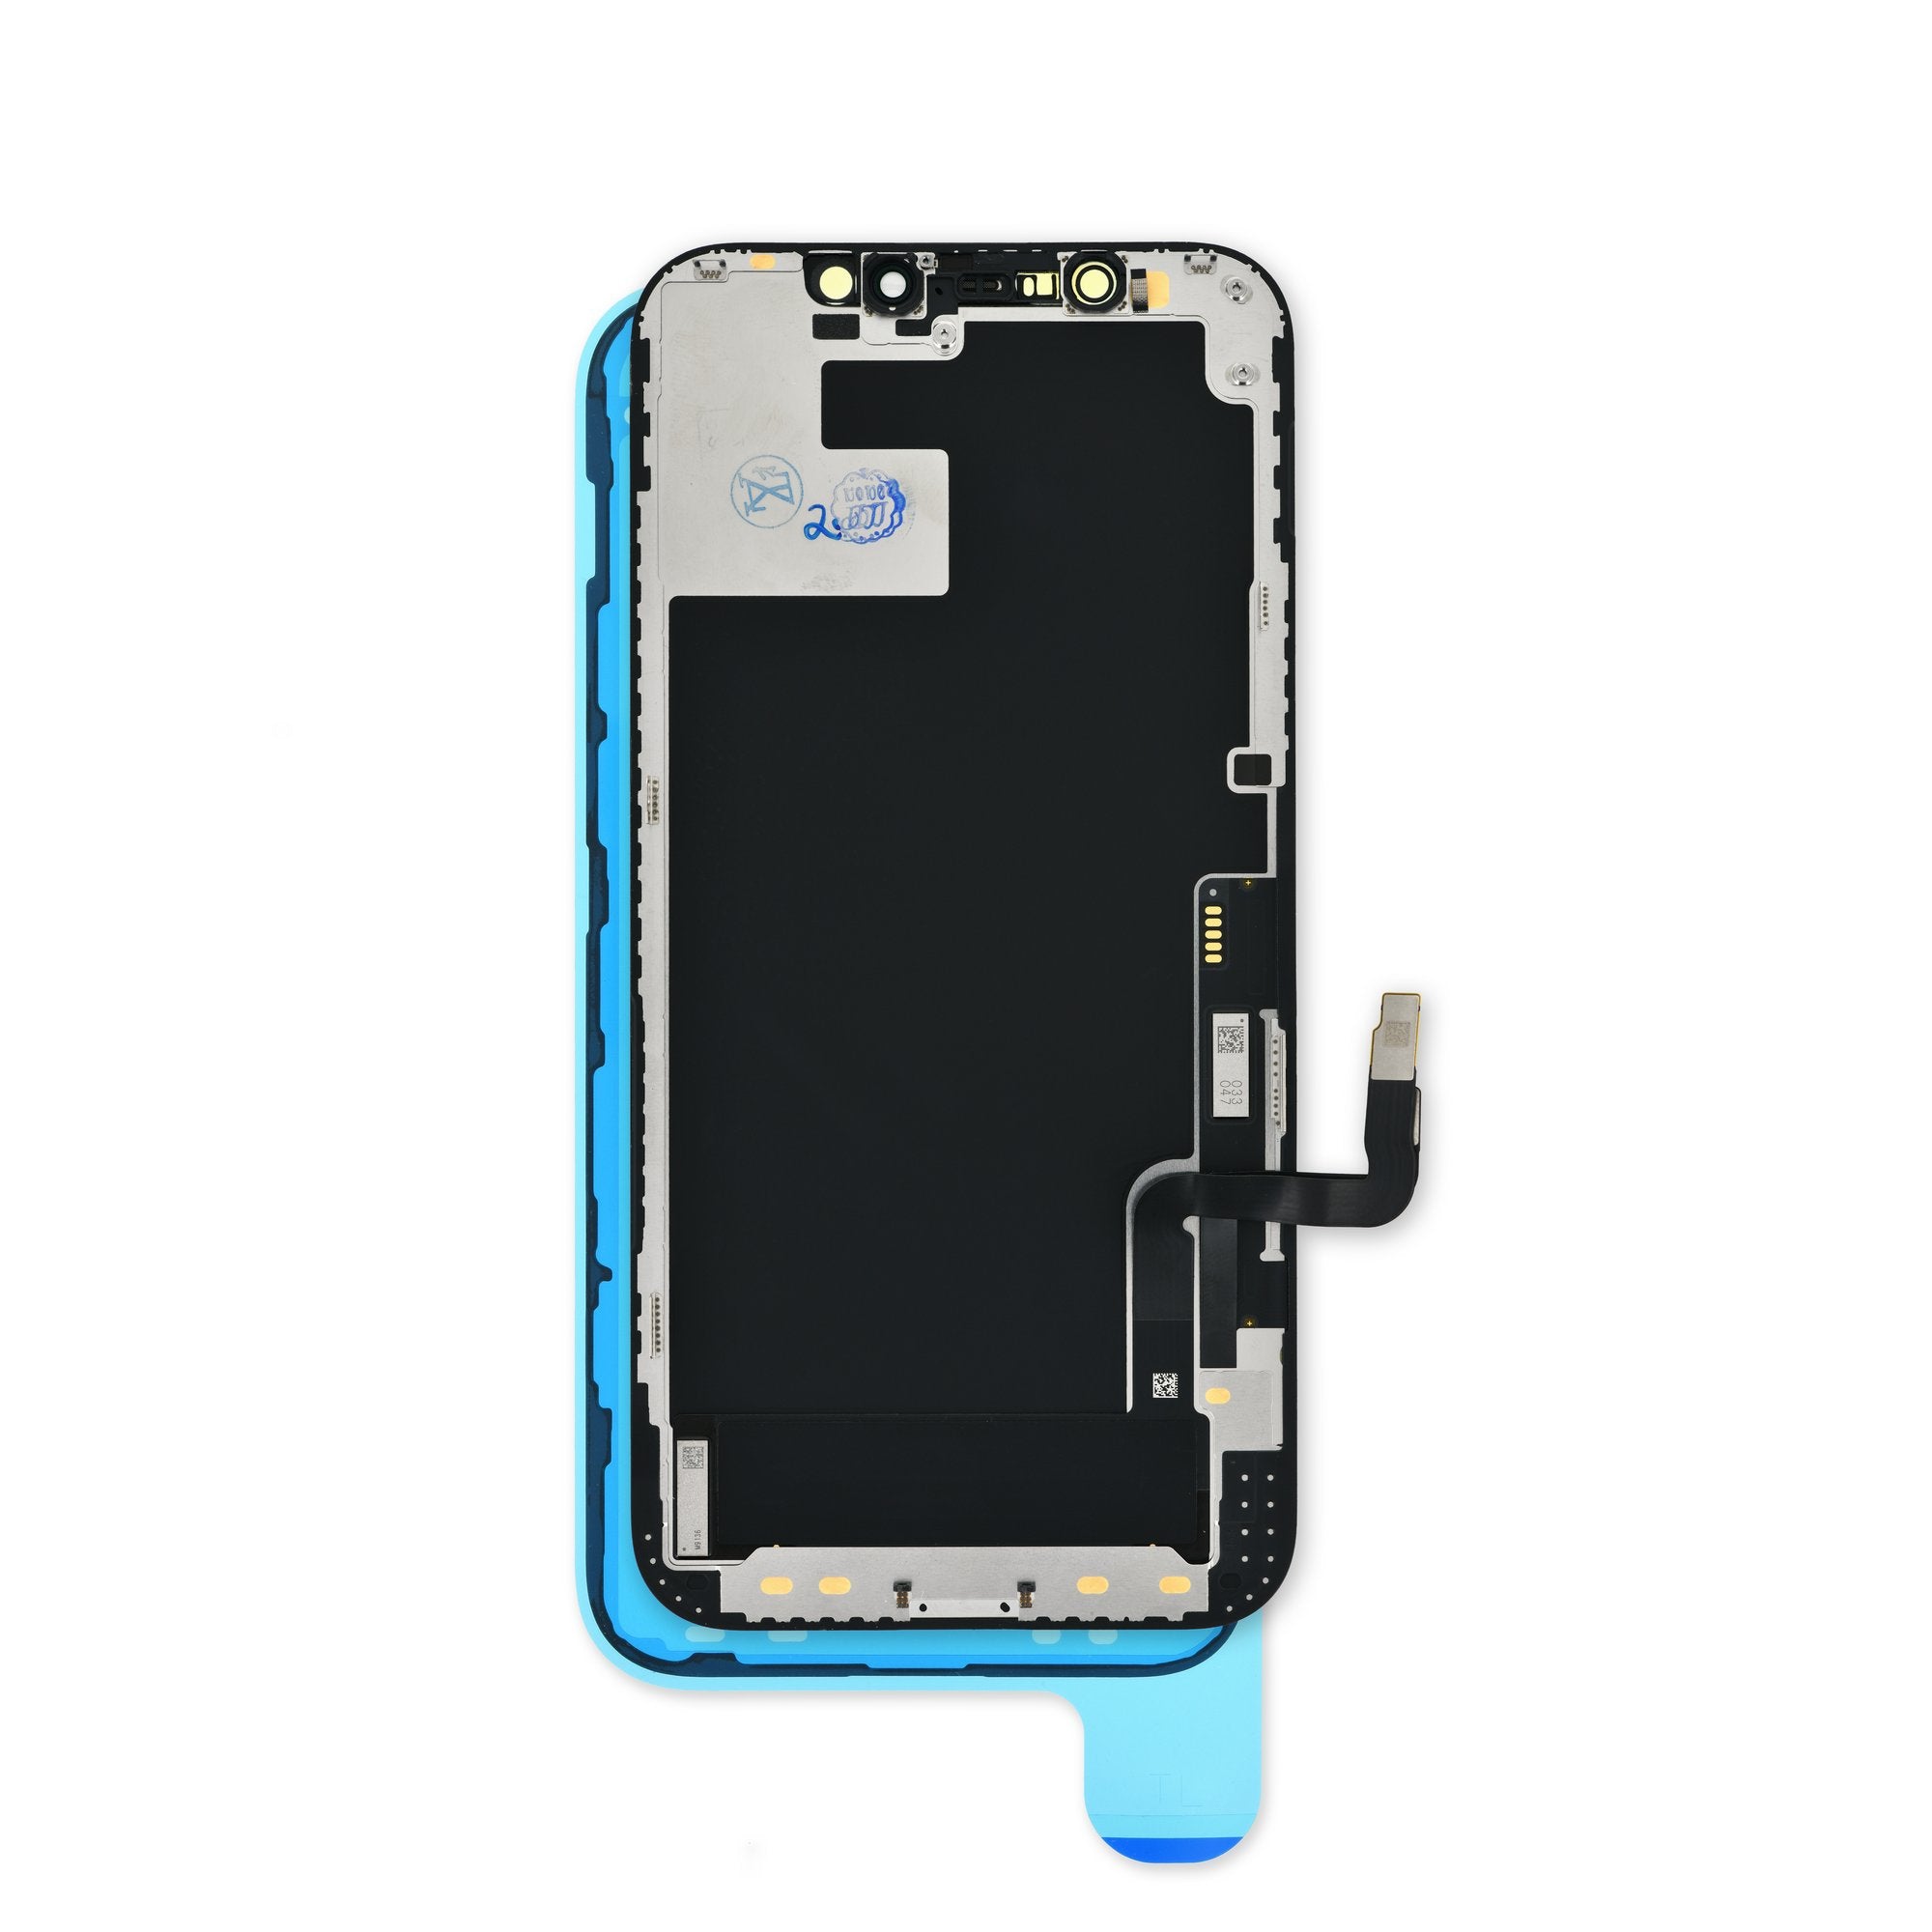 iPhone 12/12 Pro Screen: LCD and Digitizer Repair Kit - iFixit